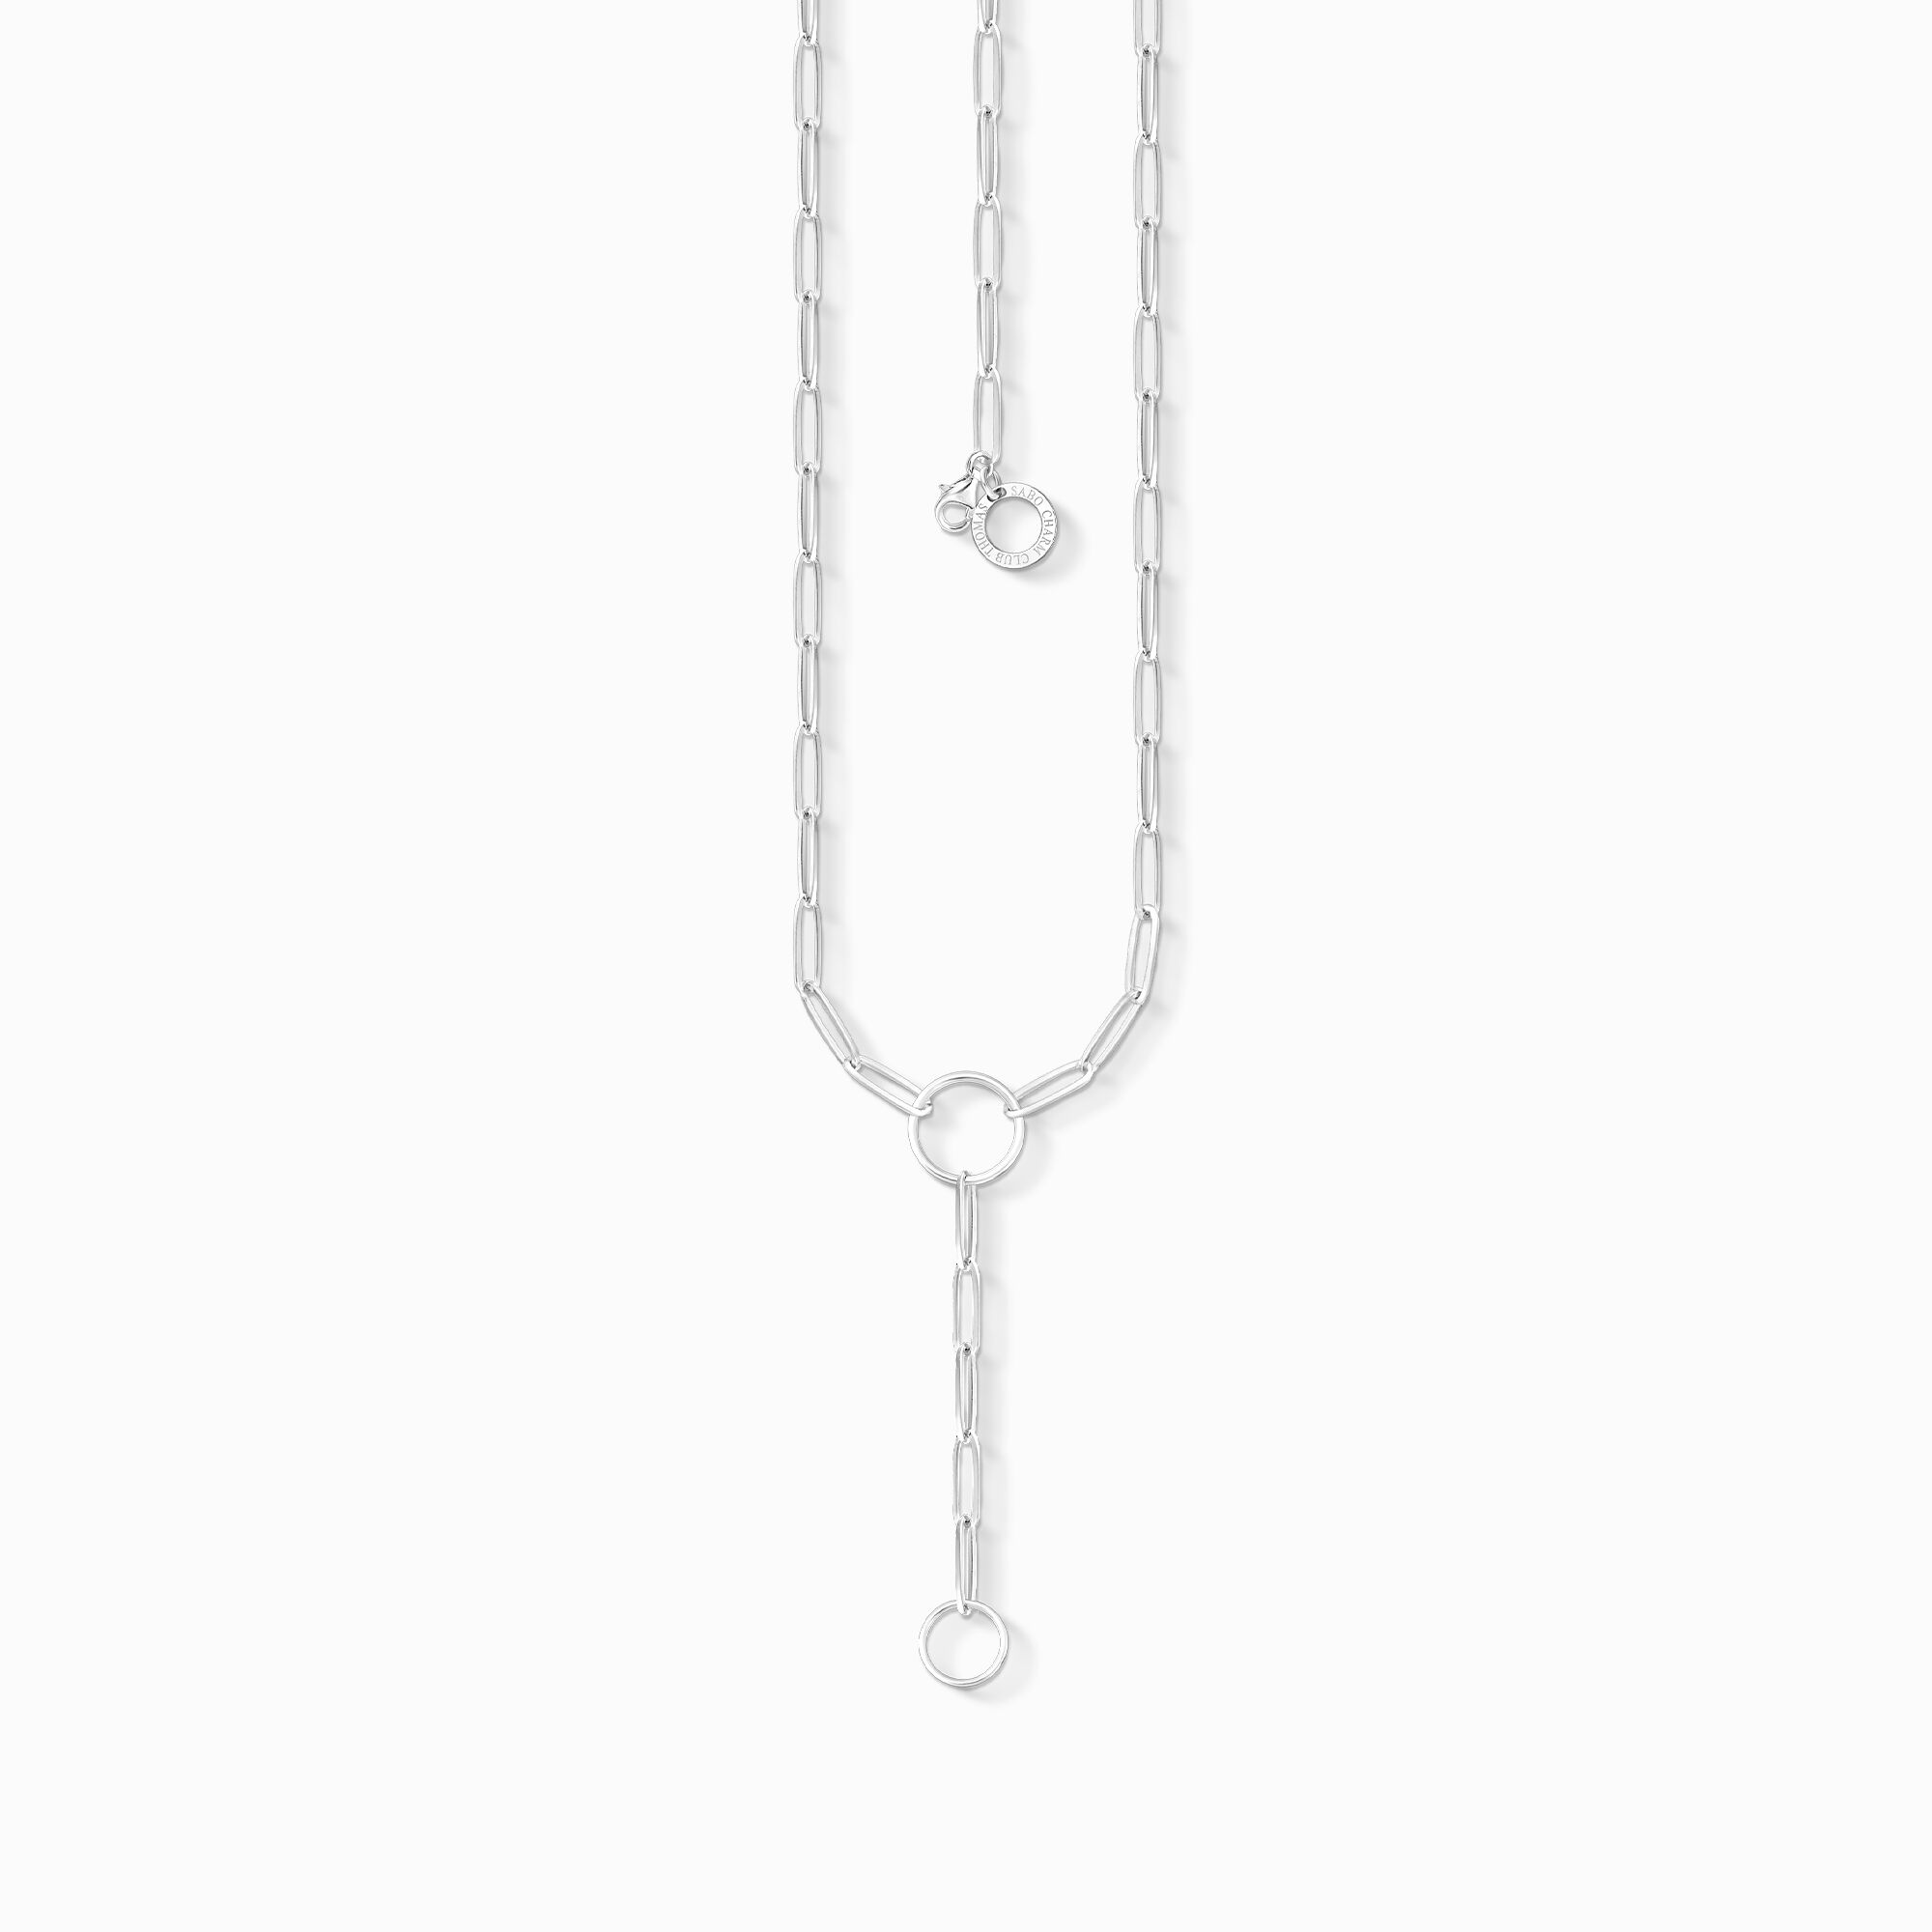 Charm necklace from the Charm Club collection in the THOMAS SABO online store